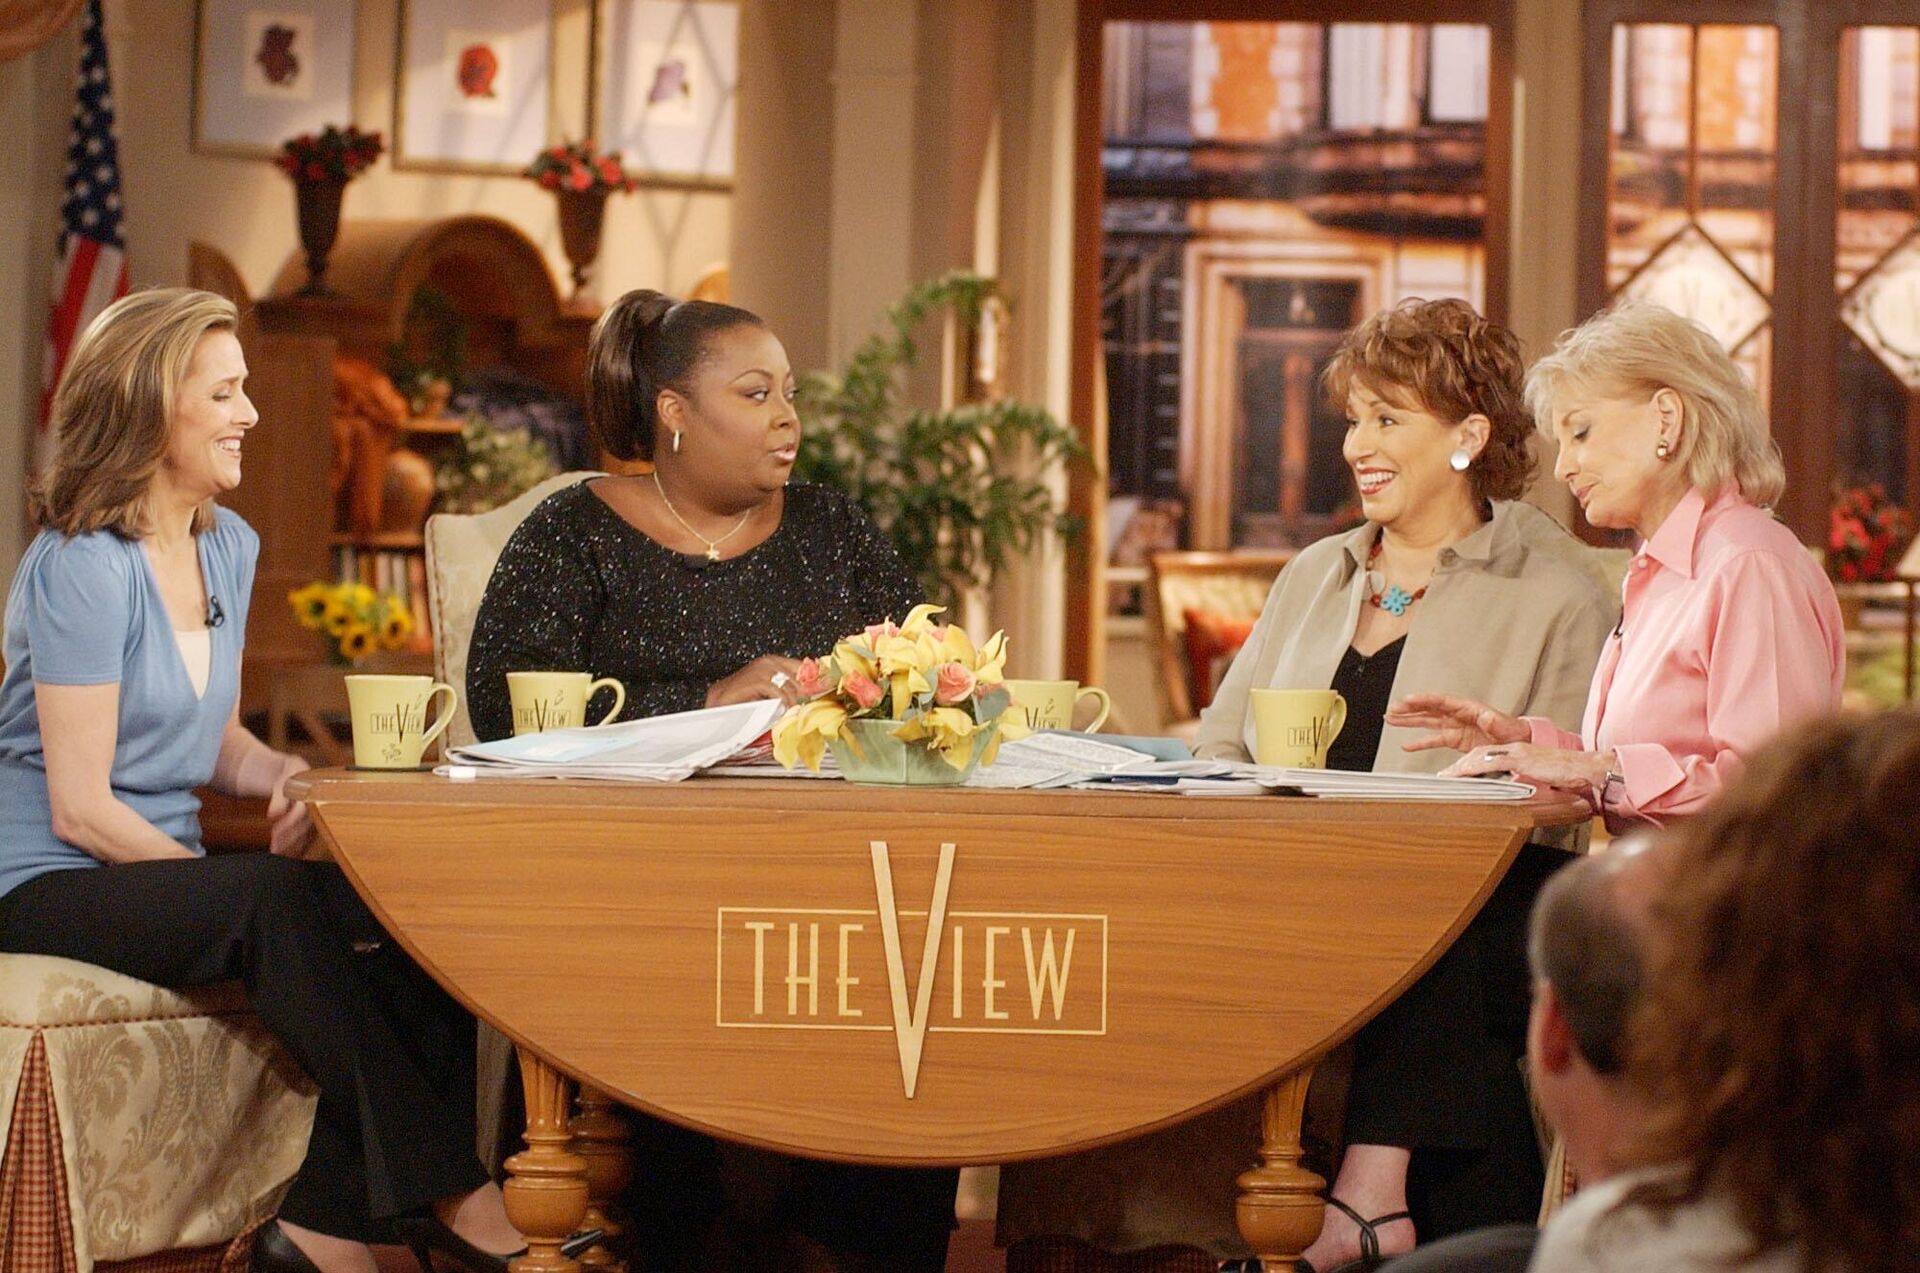 FILE - This June 5, 2003 file photo shows co-hosts, from left, Meredith Vieira, Star Jones, Joy Behar and Barbara Walters on the set of The View in New York. In July 2006, Jones surprised the audience by announcing that she would be leaving after 10 years. It was six years before she was welcomed back onto the ABC show as a guest.  - Sputnik International, 1920, 31.12.2022